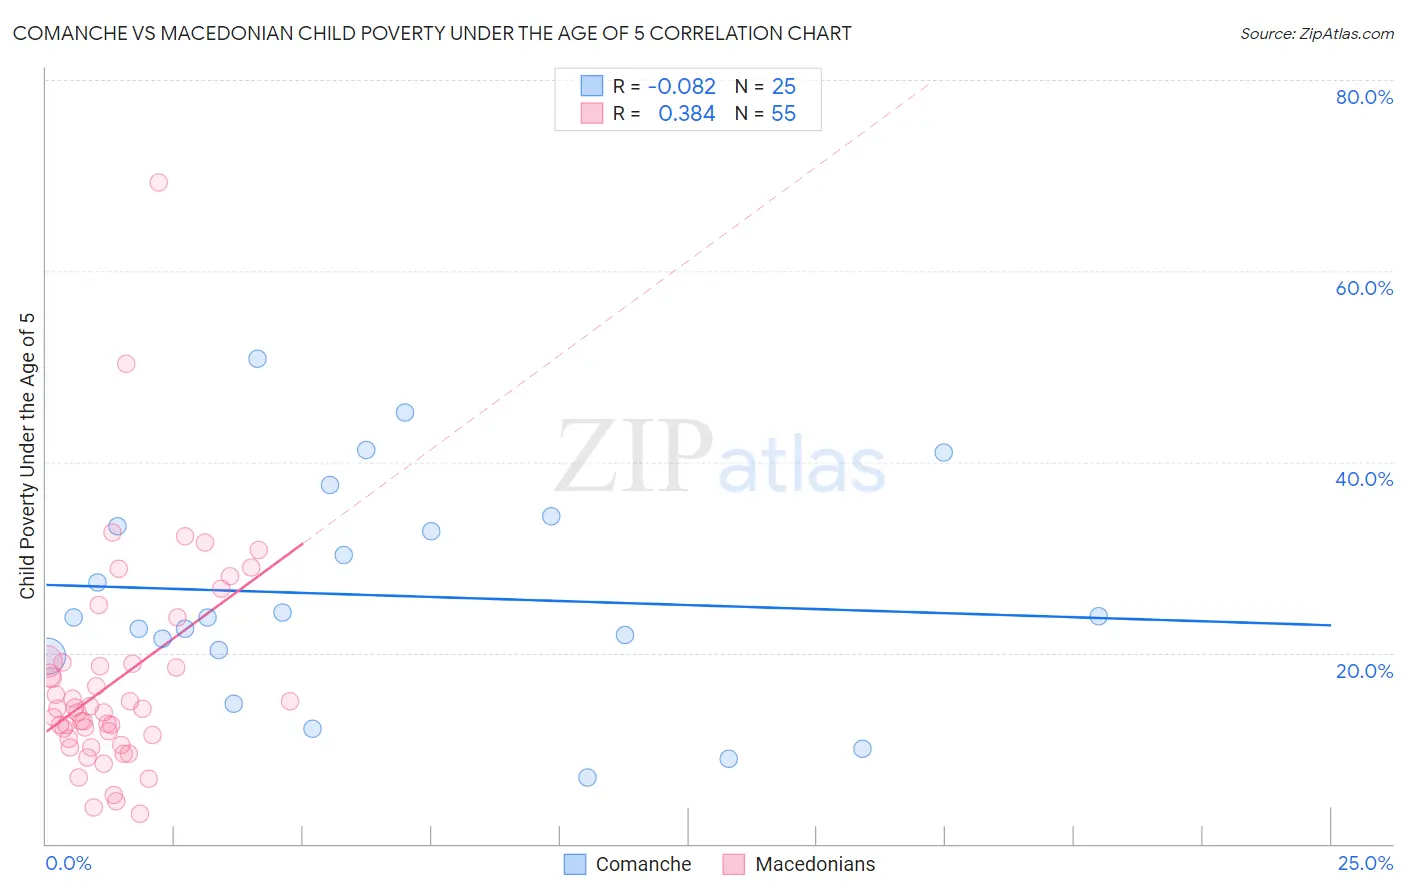 Comanche vs Macedonian Child Poverty Under the Age of 5